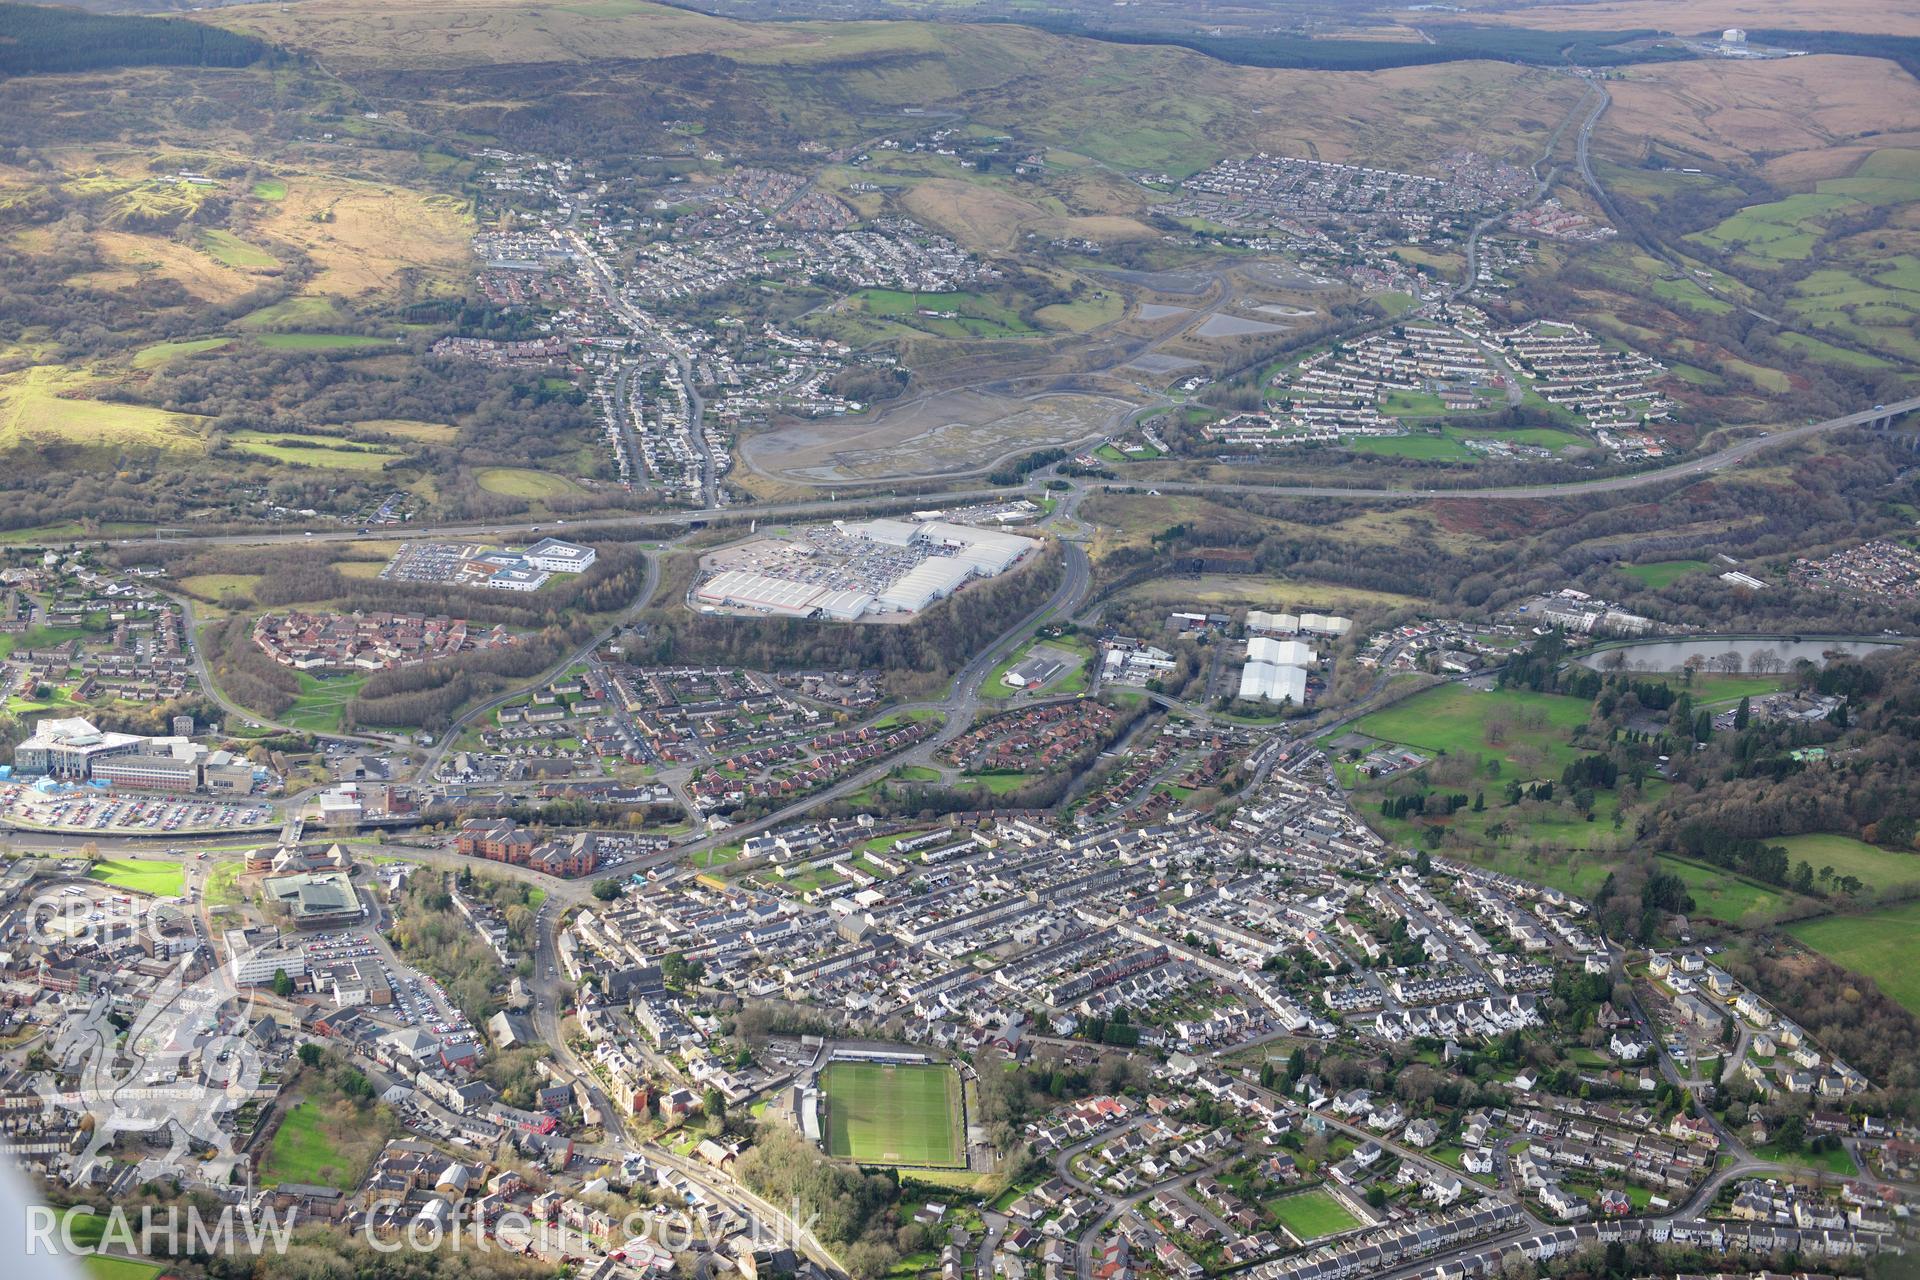 RCAHMW colour oblique photograph of Merthyr Tydfil, townscape from east. Taken by Toby Driver on 28/11/2012.